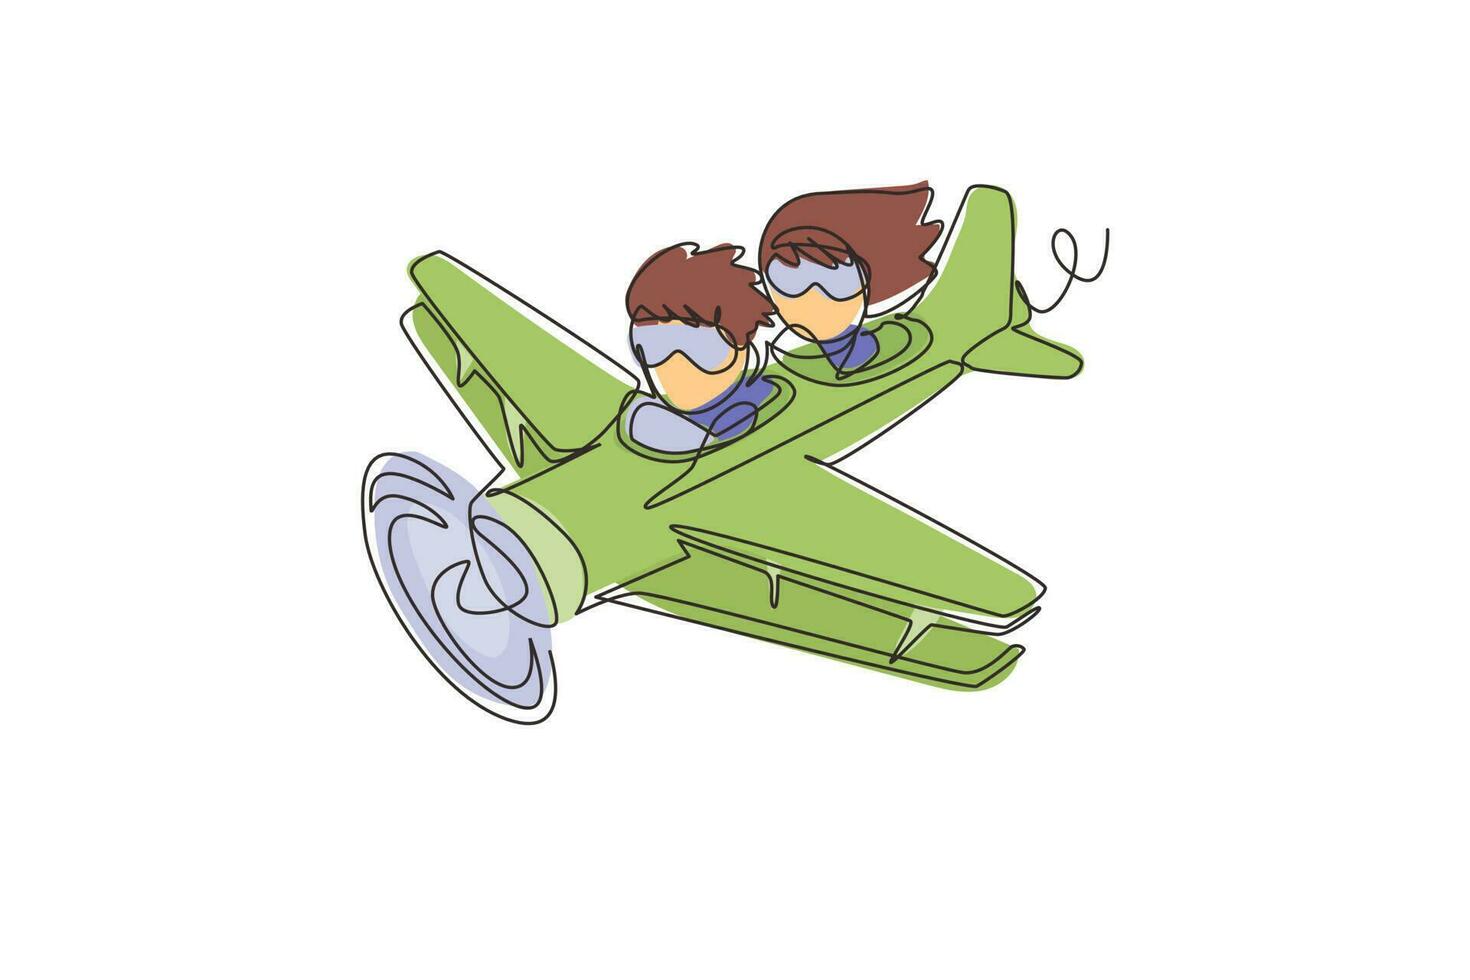 Continuous one line drawing little boy operating plane and a girl as passengers. Kids flying in airplane. Happy smiling kid flying plane like real pilot. Single line design vector graphic illustration